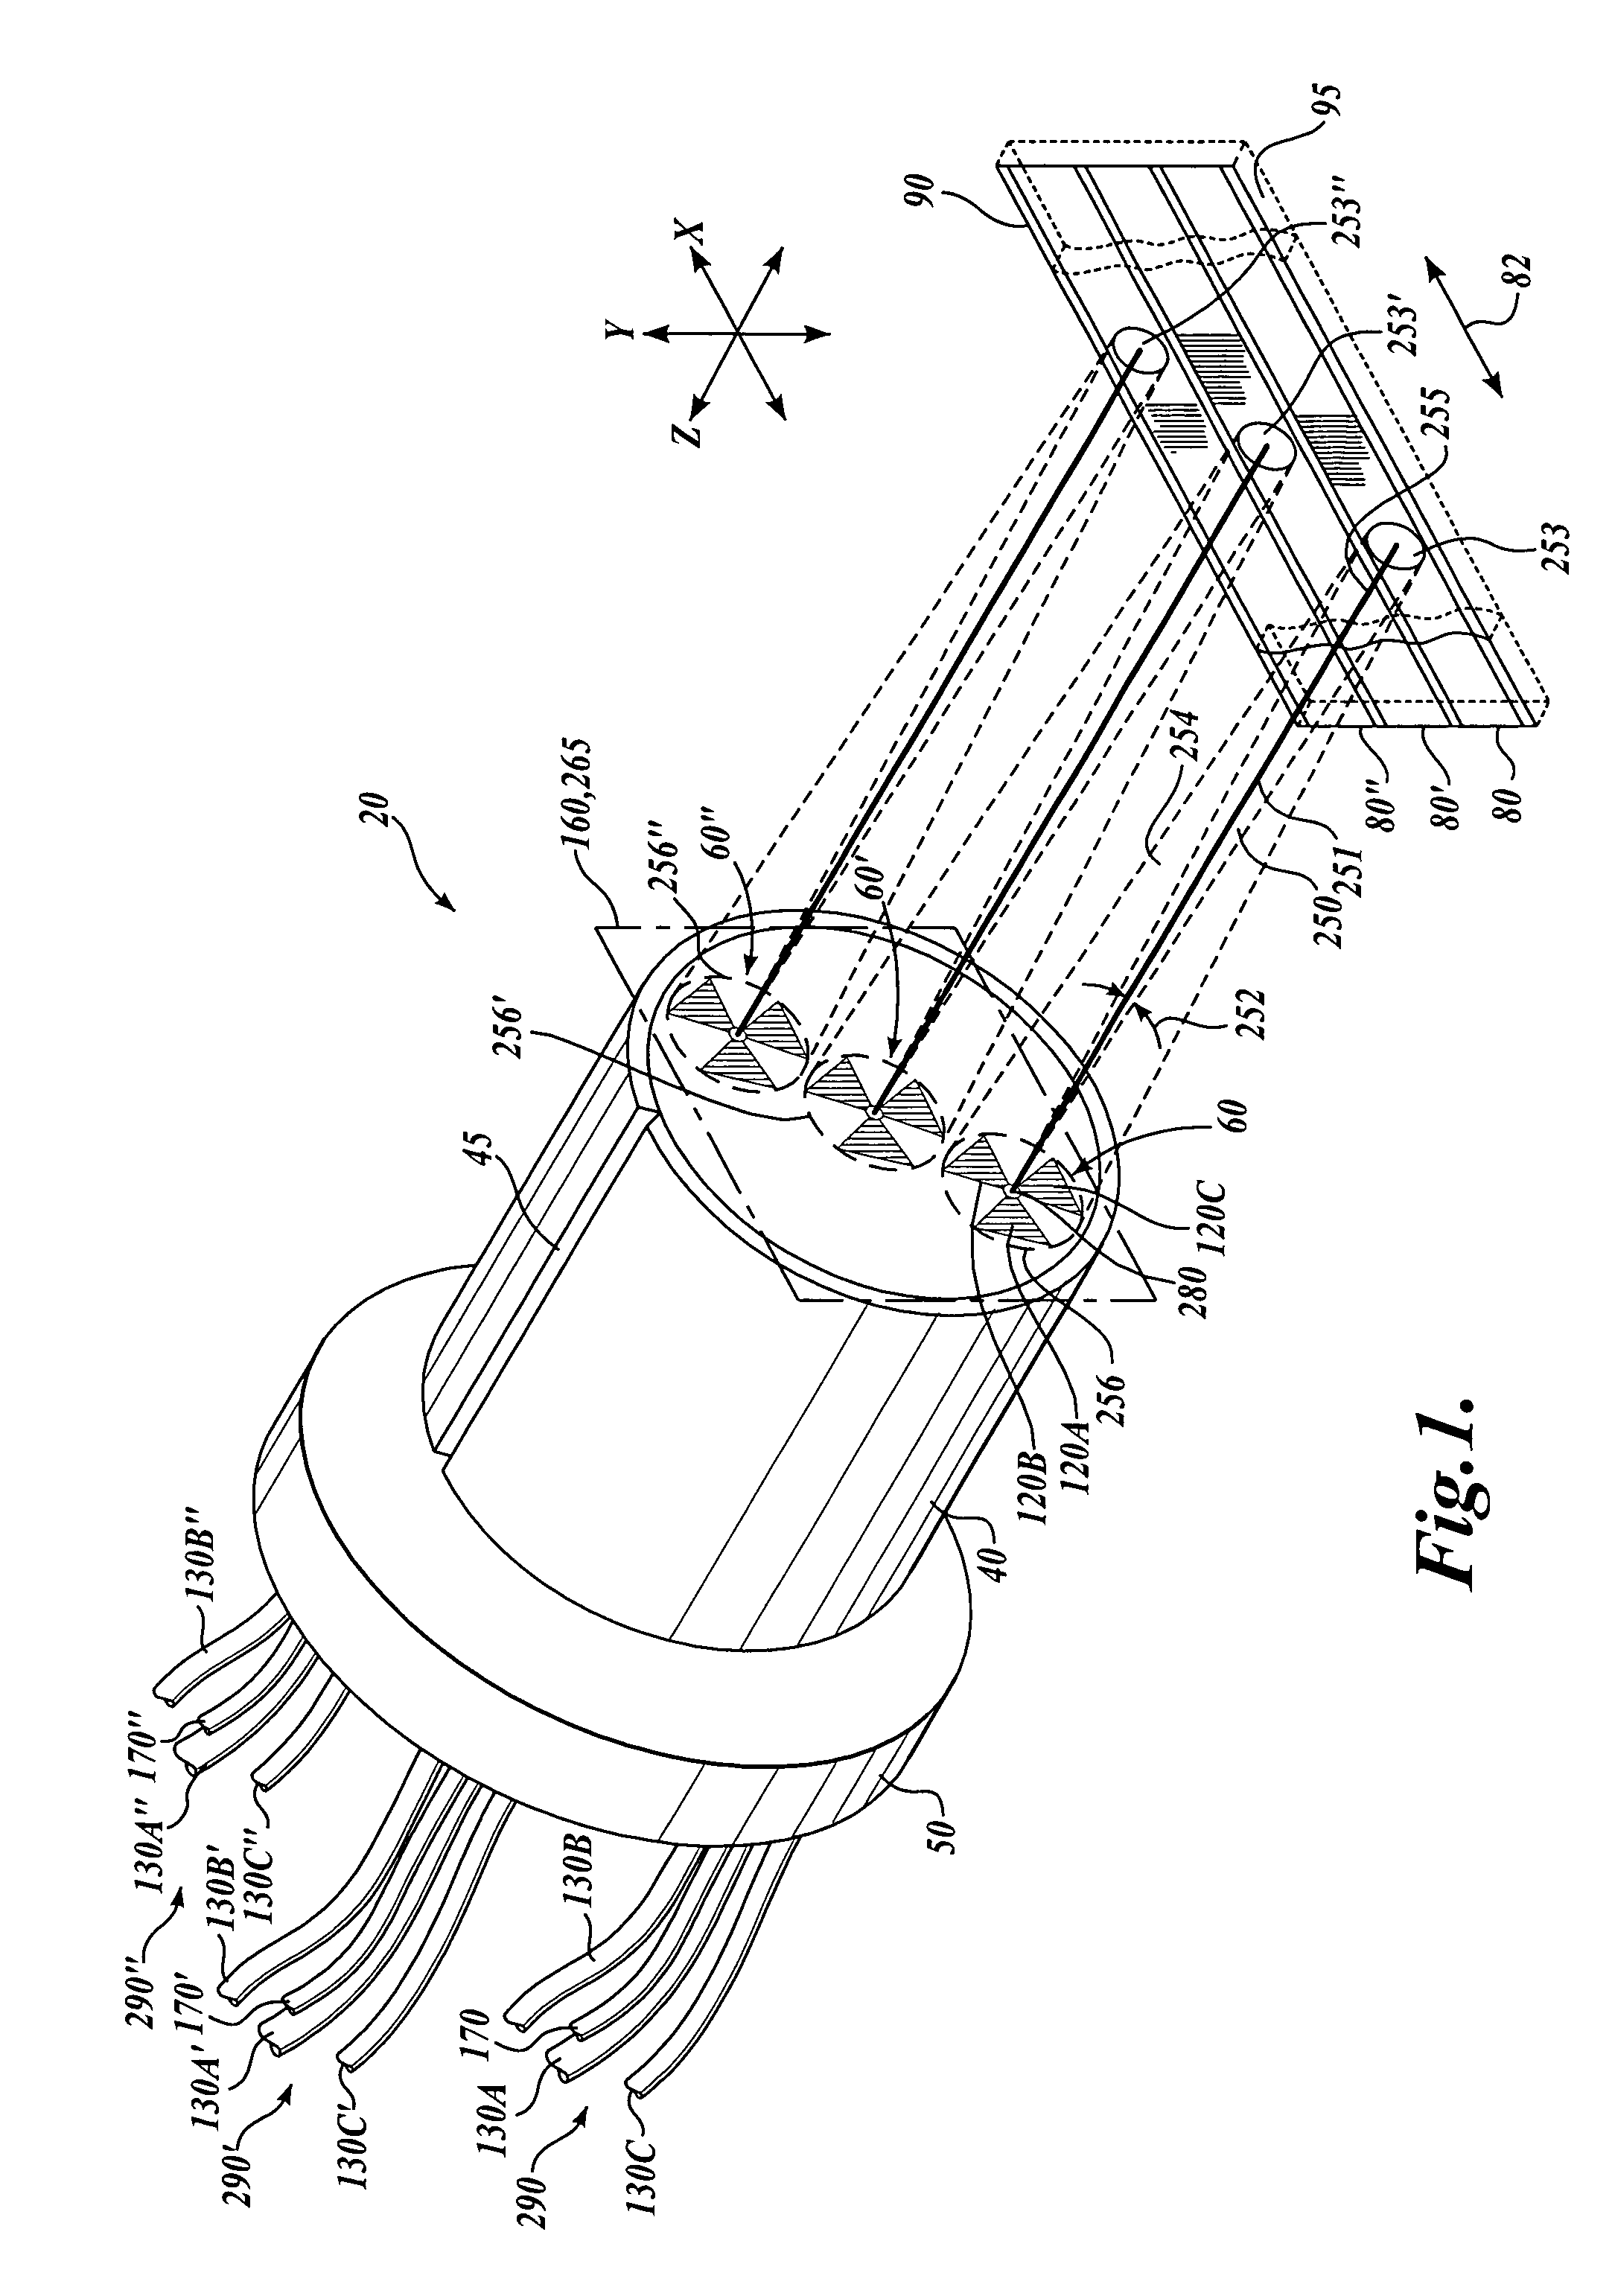 Absolute position miniature grating encoder readhead using fiber optic receiver channels